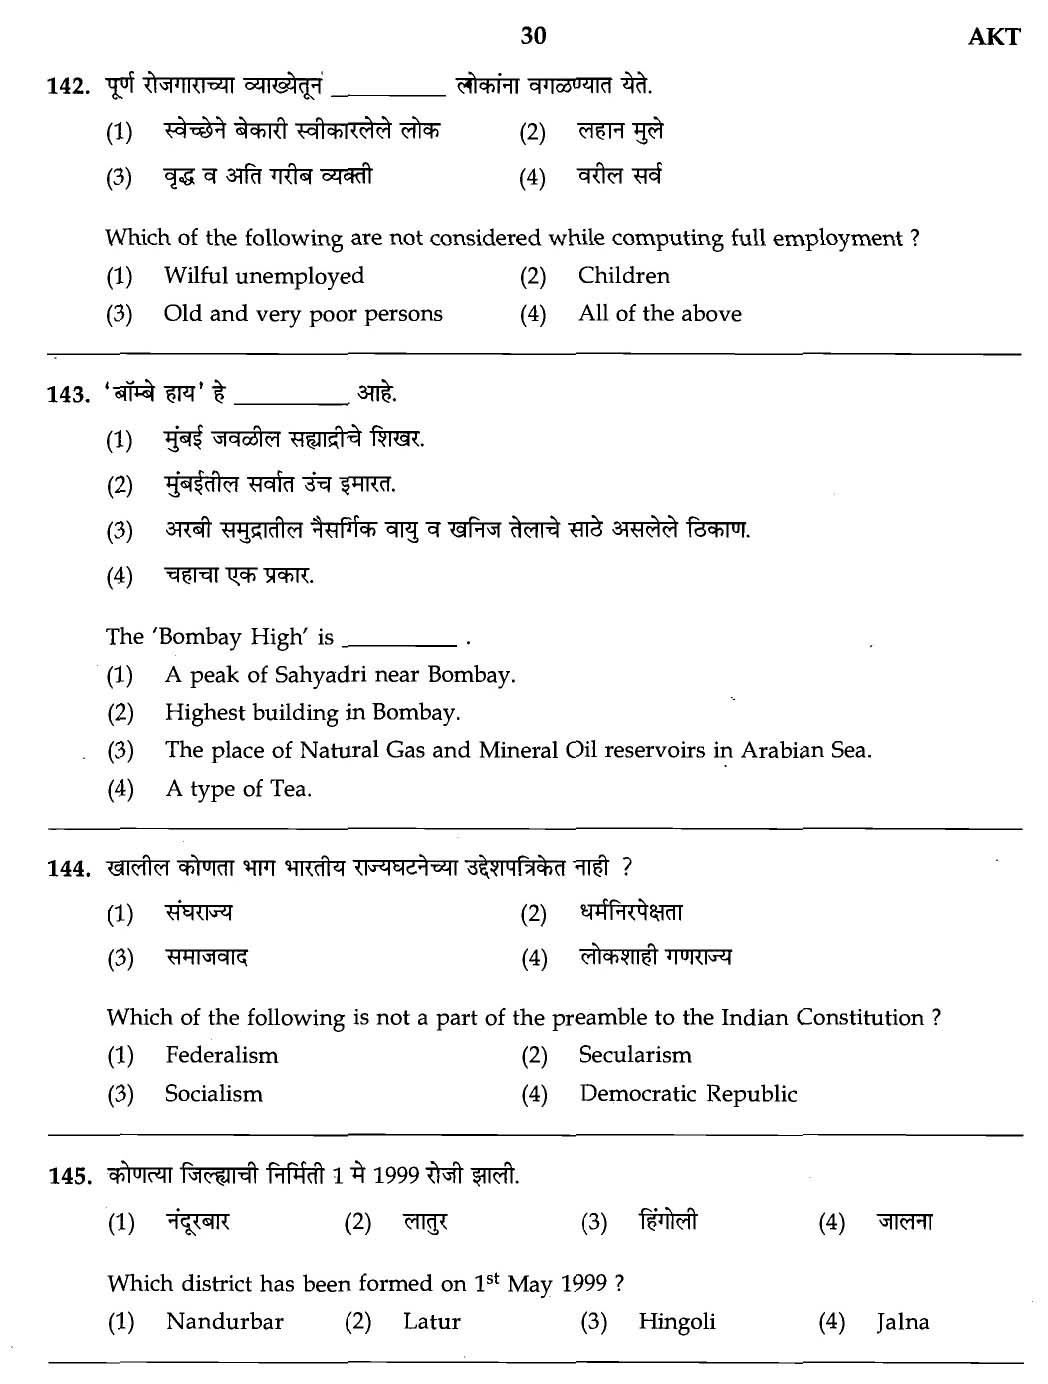 MPSC Agricultural Services Exam 2007 General Question Paper 28